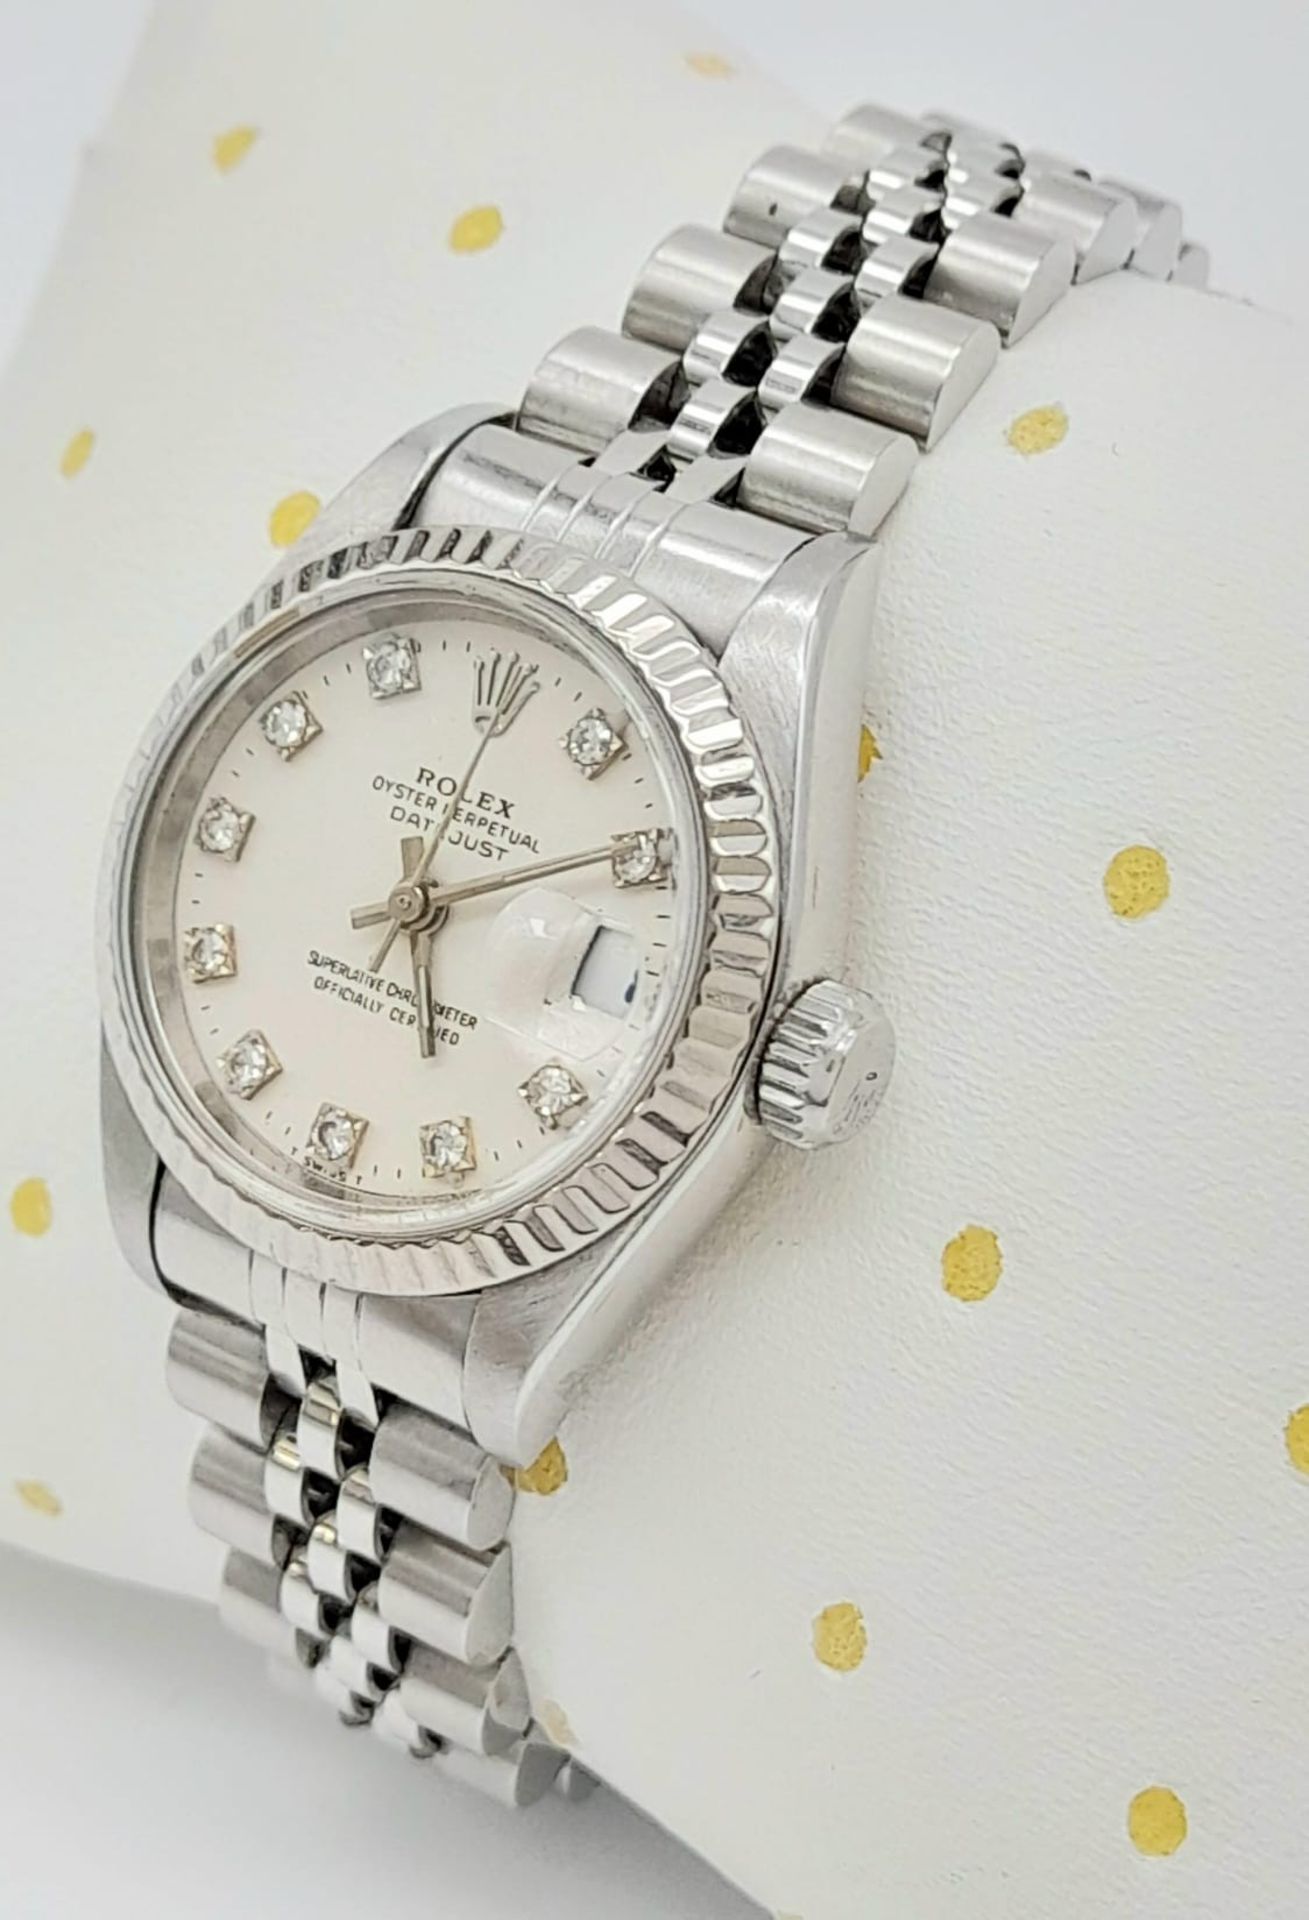 A Rolex Oyster Perpetual Datejust Ladies Watch. Stainless steel bracelet and case - 26mm. White dial - Image 2 of 8